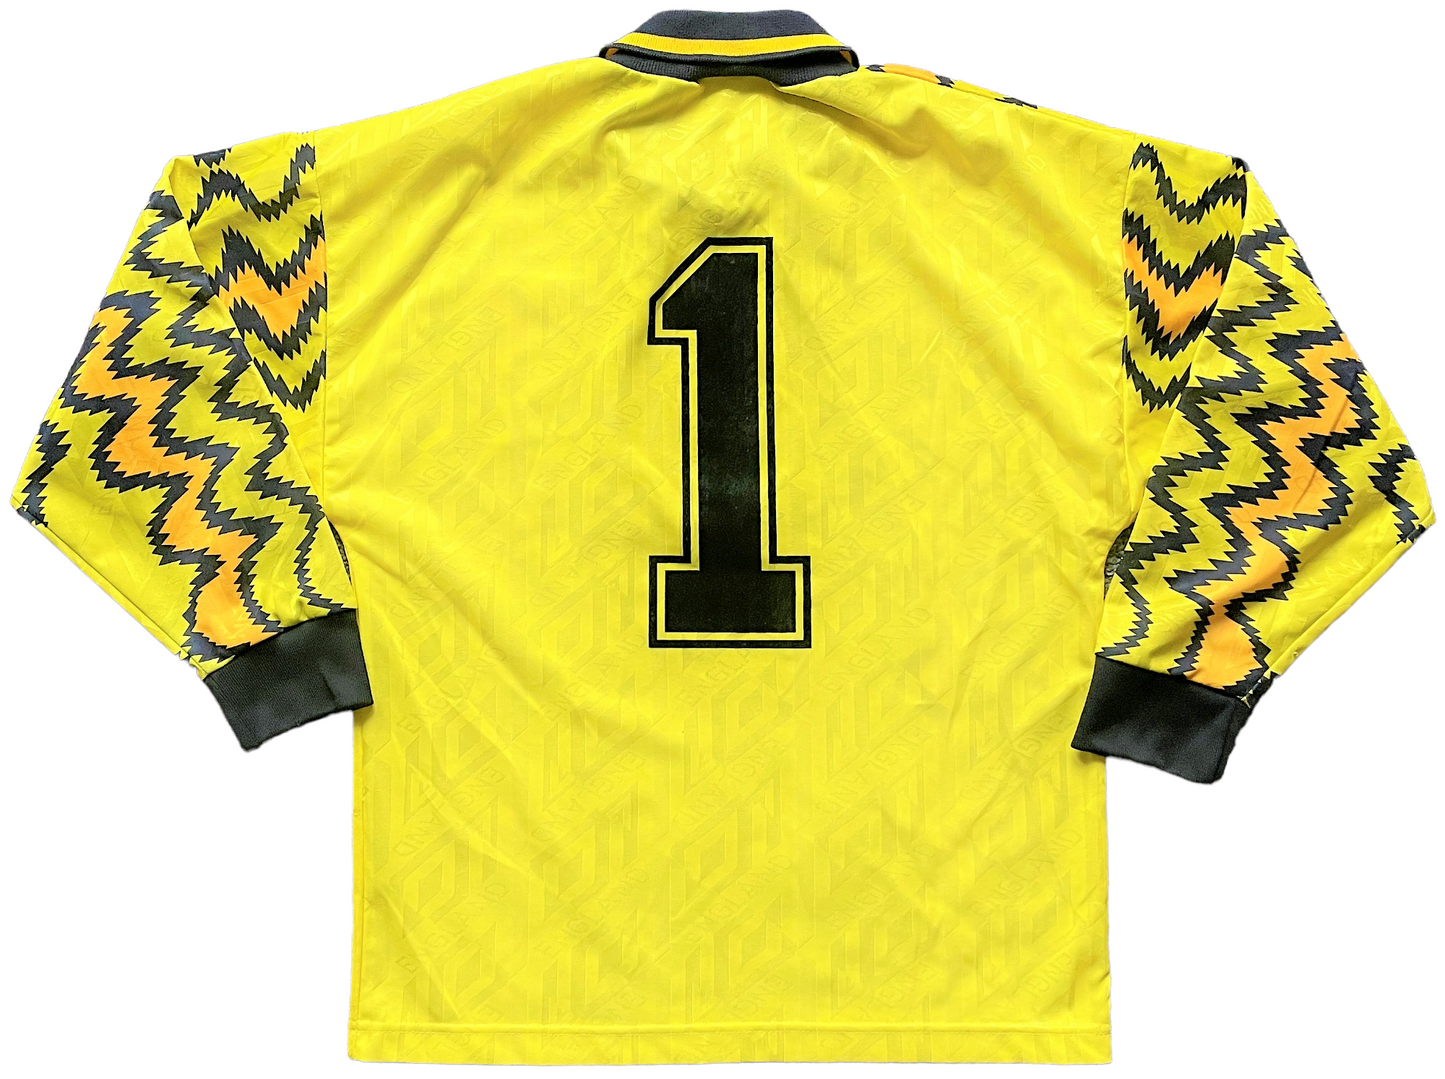 England 1992 Goalkeeper shirt (excellent) AdultsSmall/Large Youth.